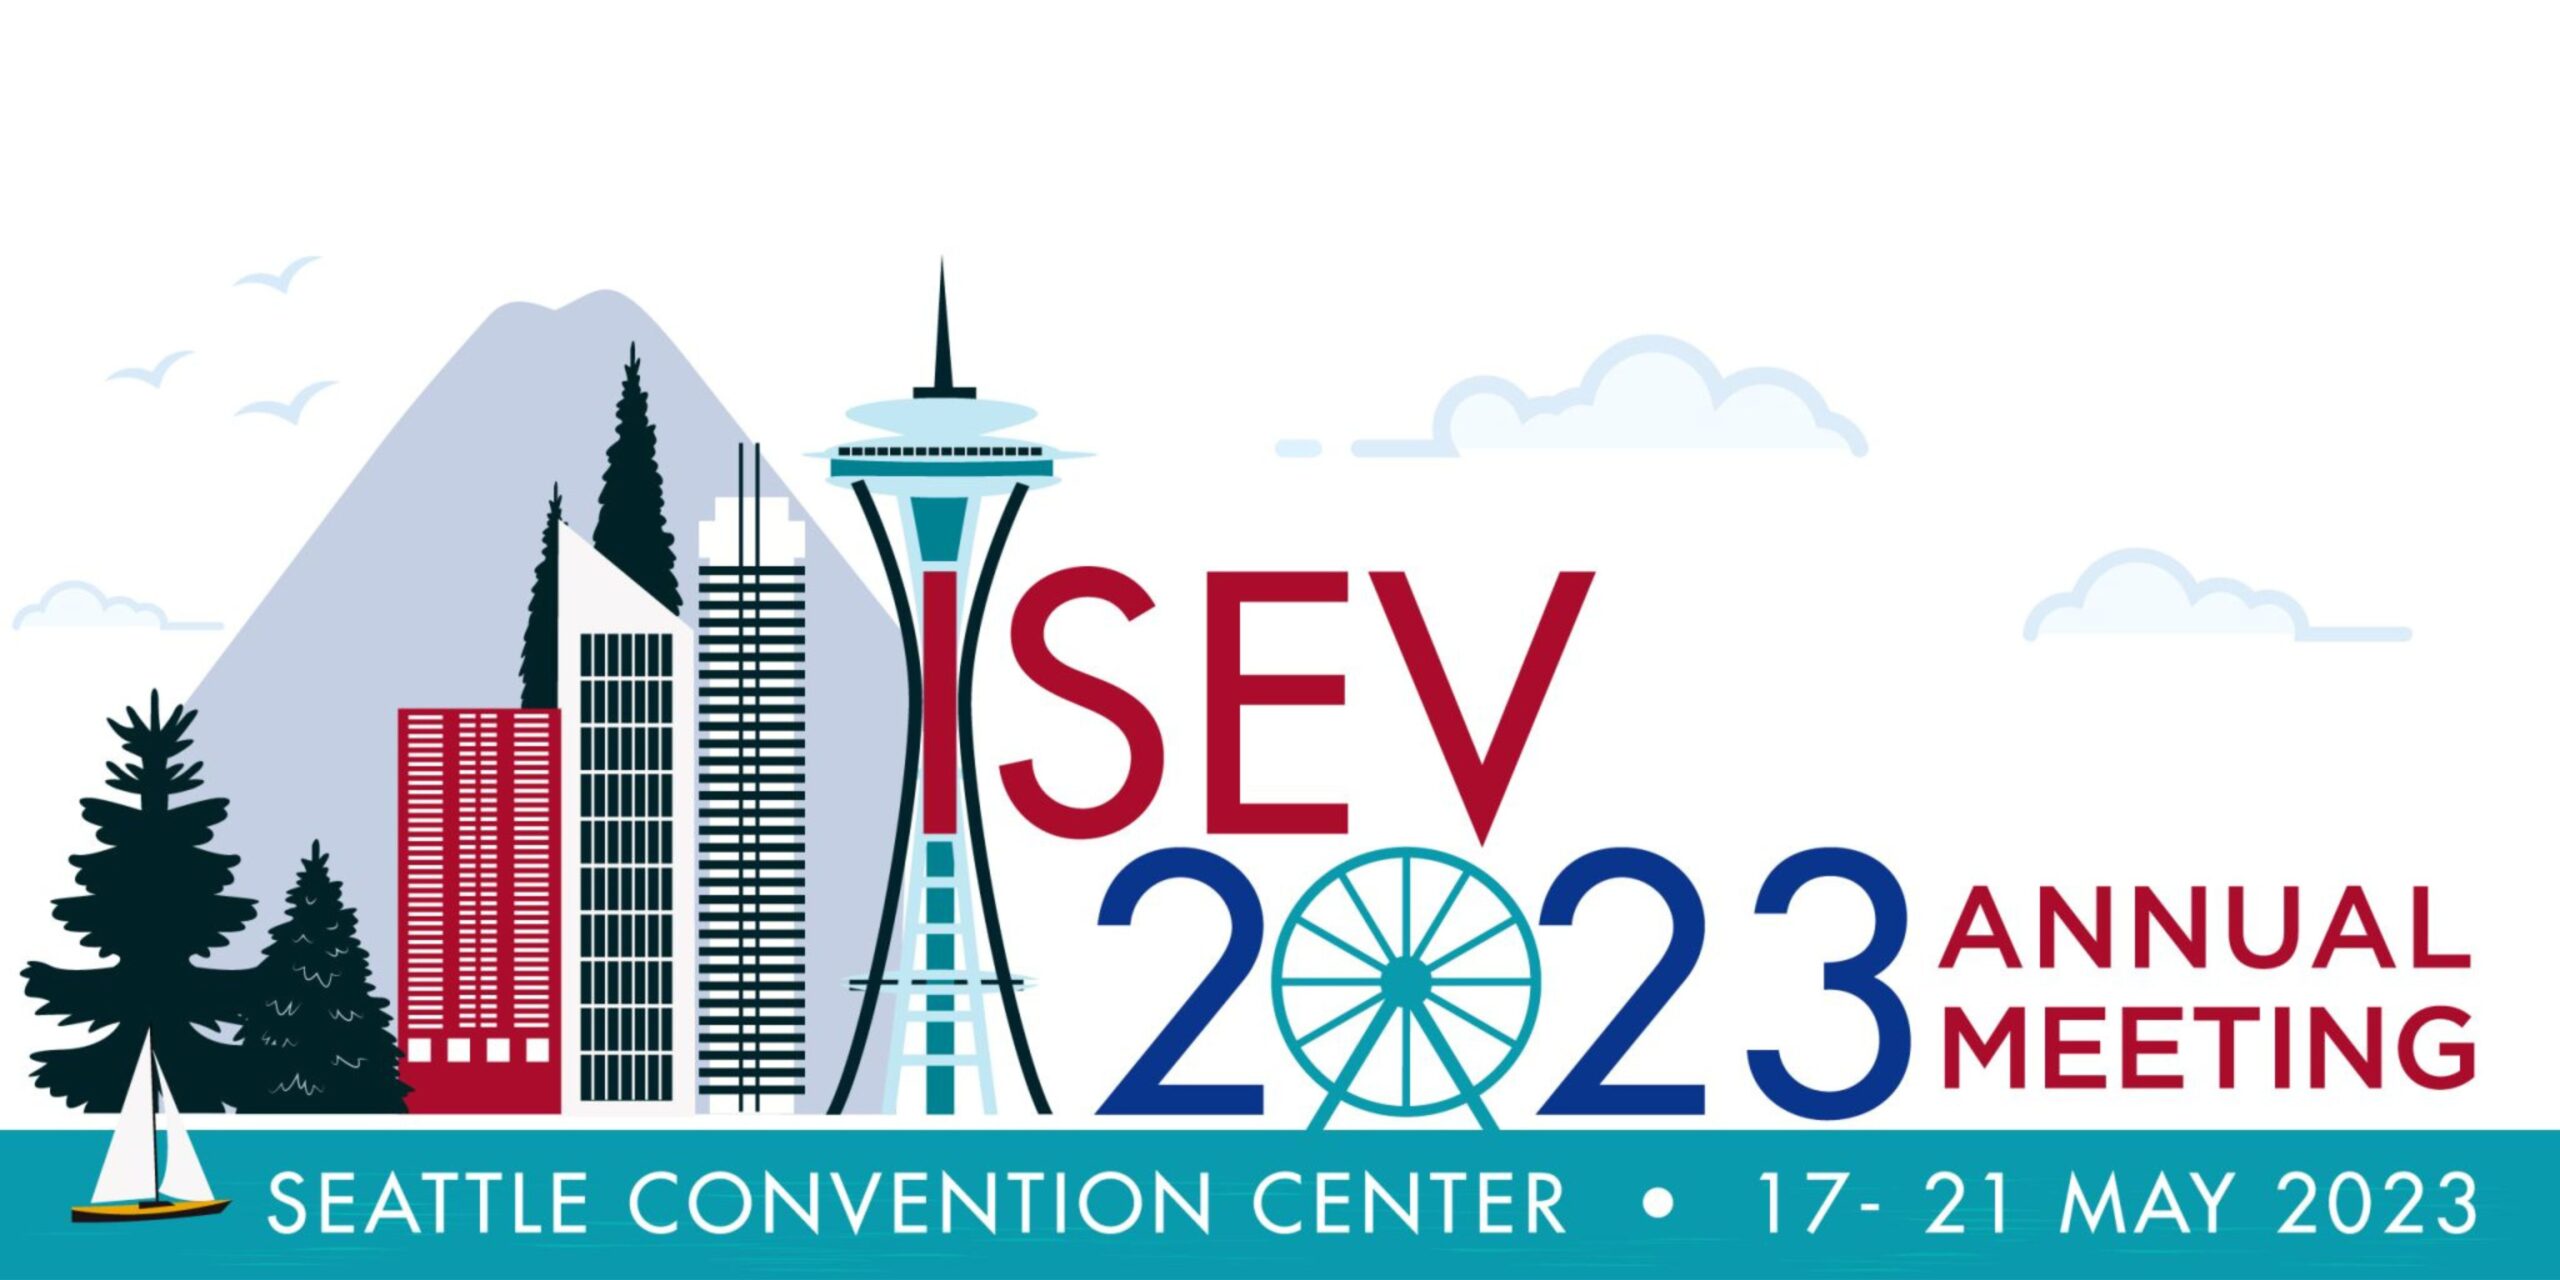 SiMPore Technology for Single Extracellular Vesicle Detection Presented at ISEV 2023